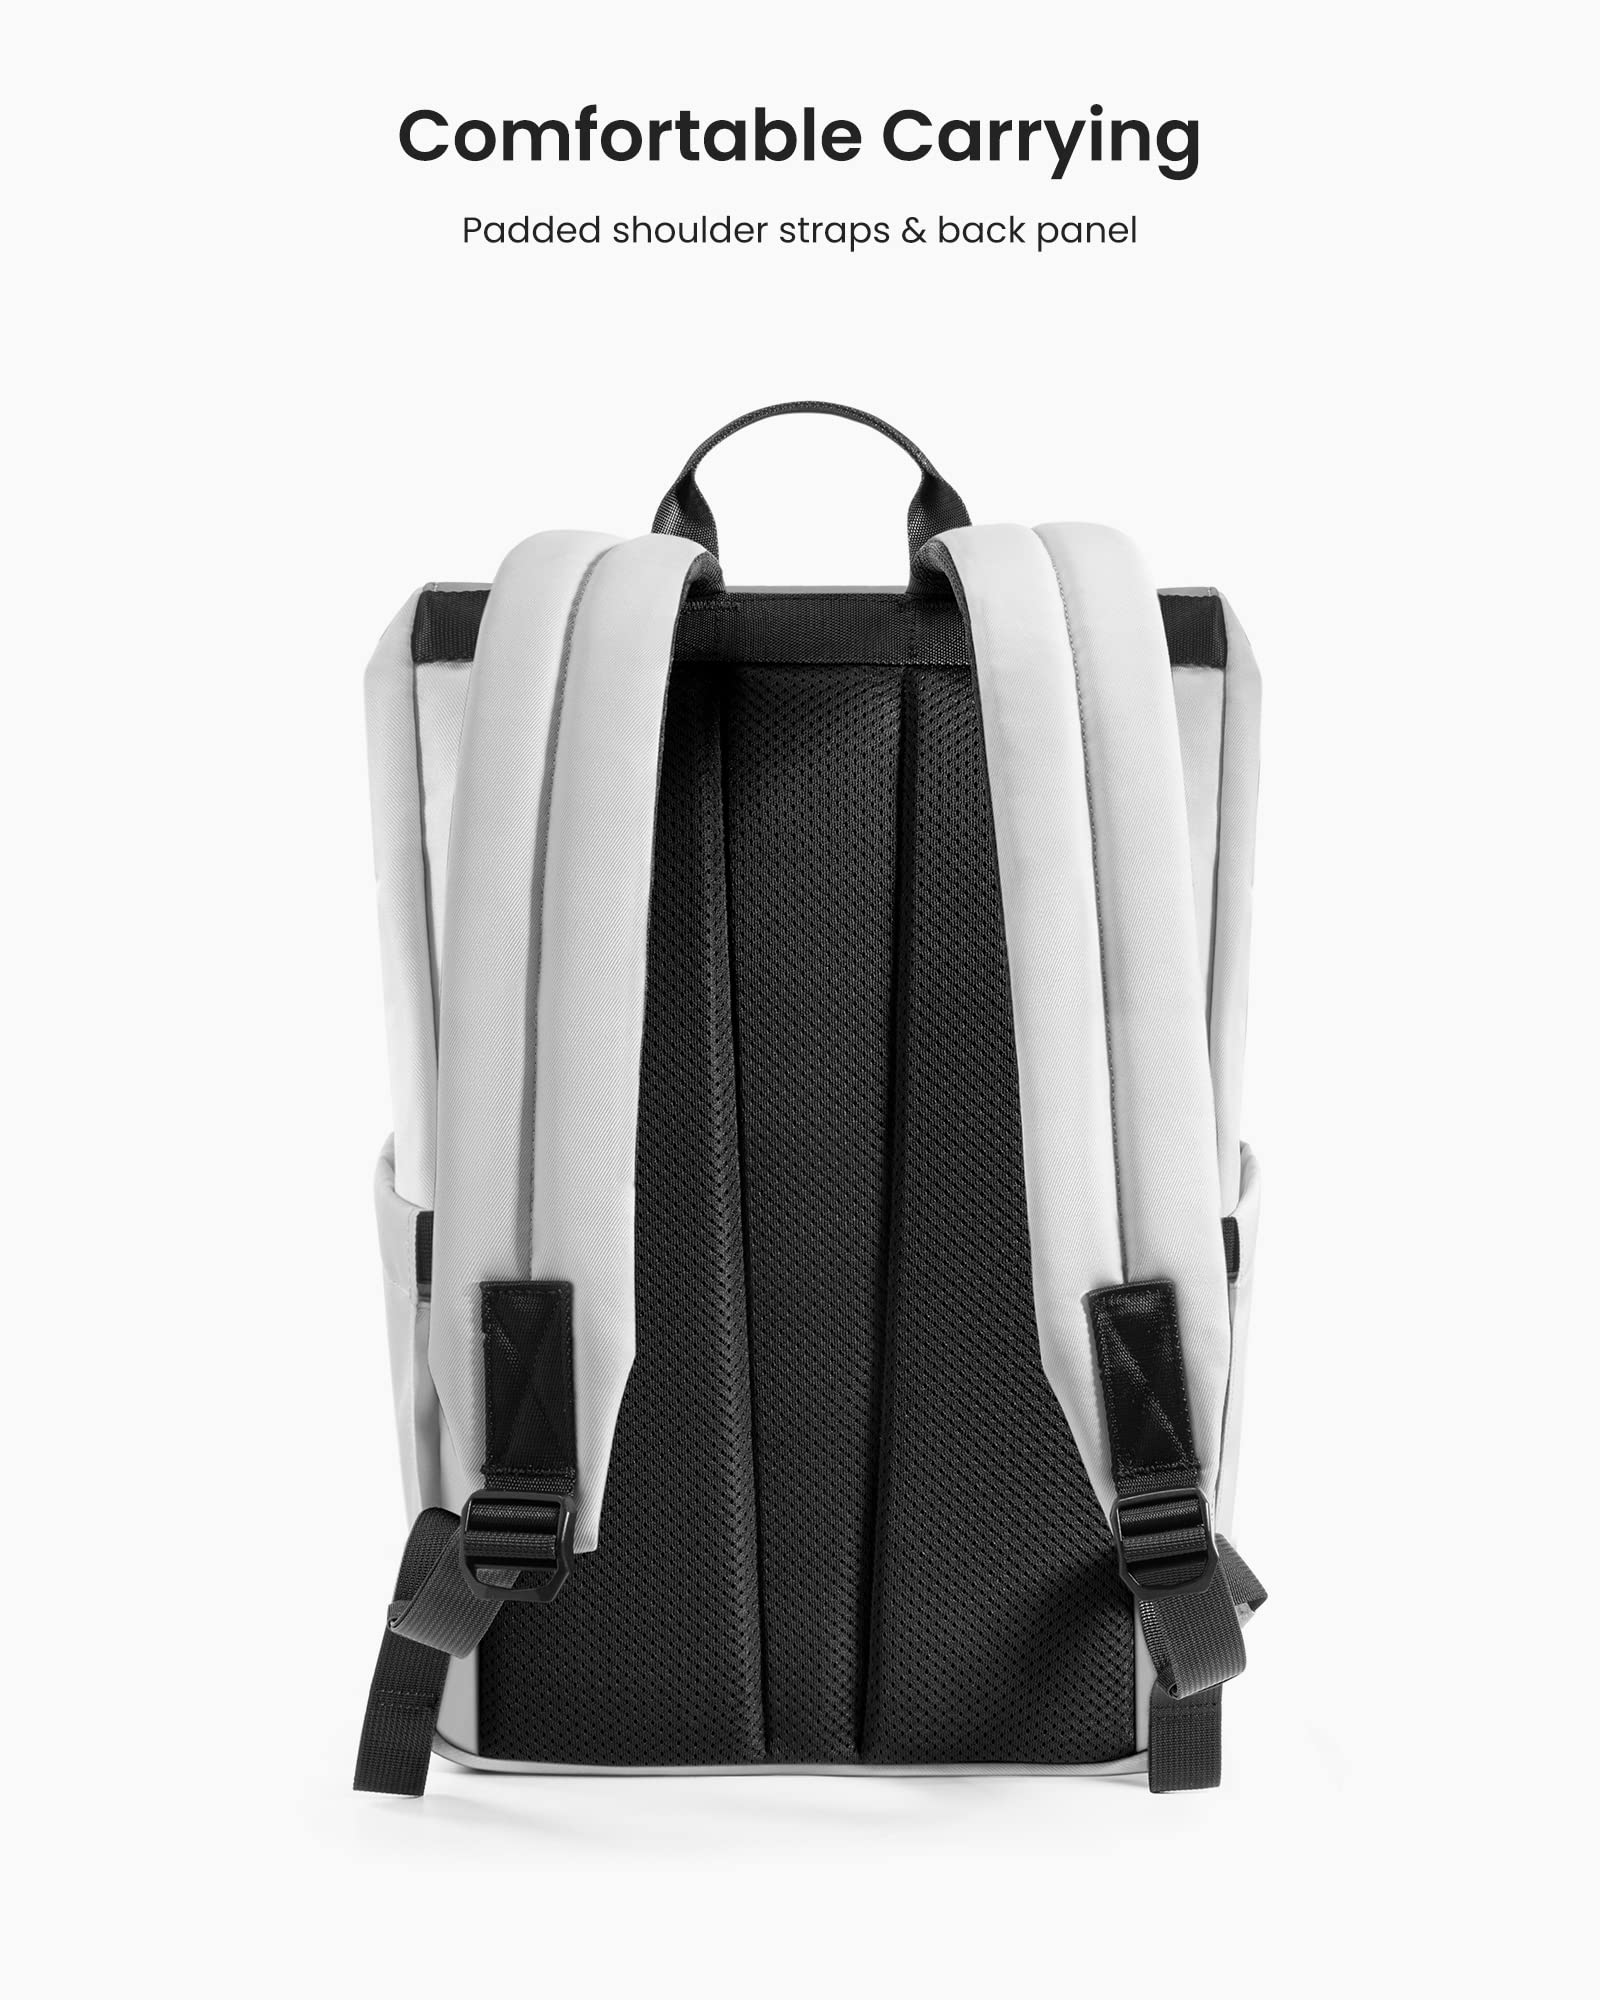 tomtoc Flap Laptop Backpack, Lightweight, Water-Resistant College Travel Casual Daypack, Slim Durable Work-pack Rucksack for 13-16 Inch MacBook Laptop, Large Capacity, 18L, Gray